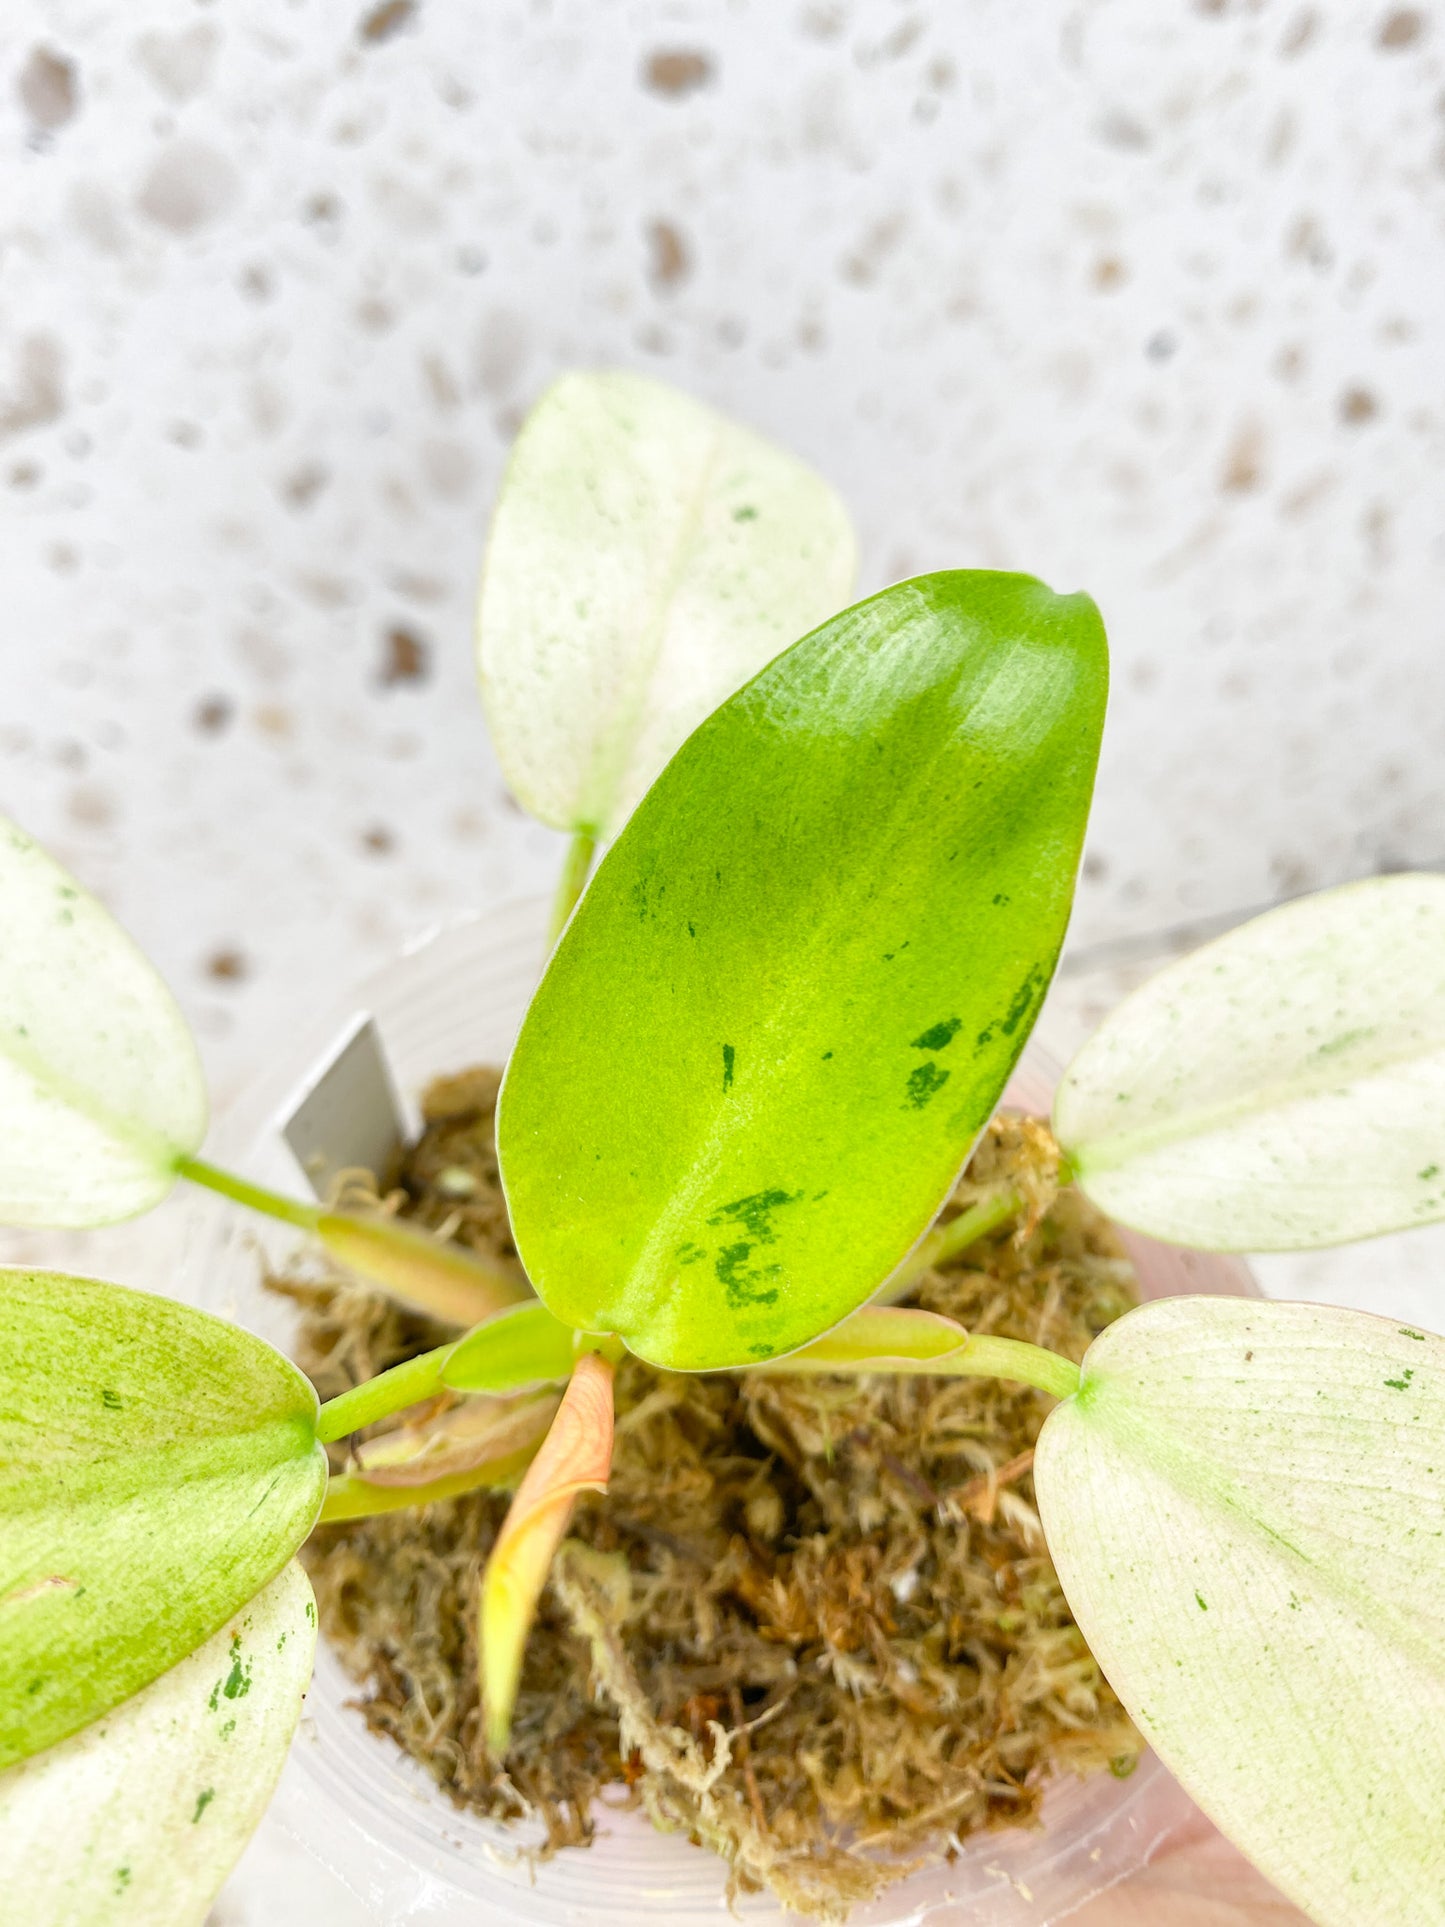 Philodendron Whipple Way A++ Graded 8 leaf baby plant newest leaf is unfurling (rooting)